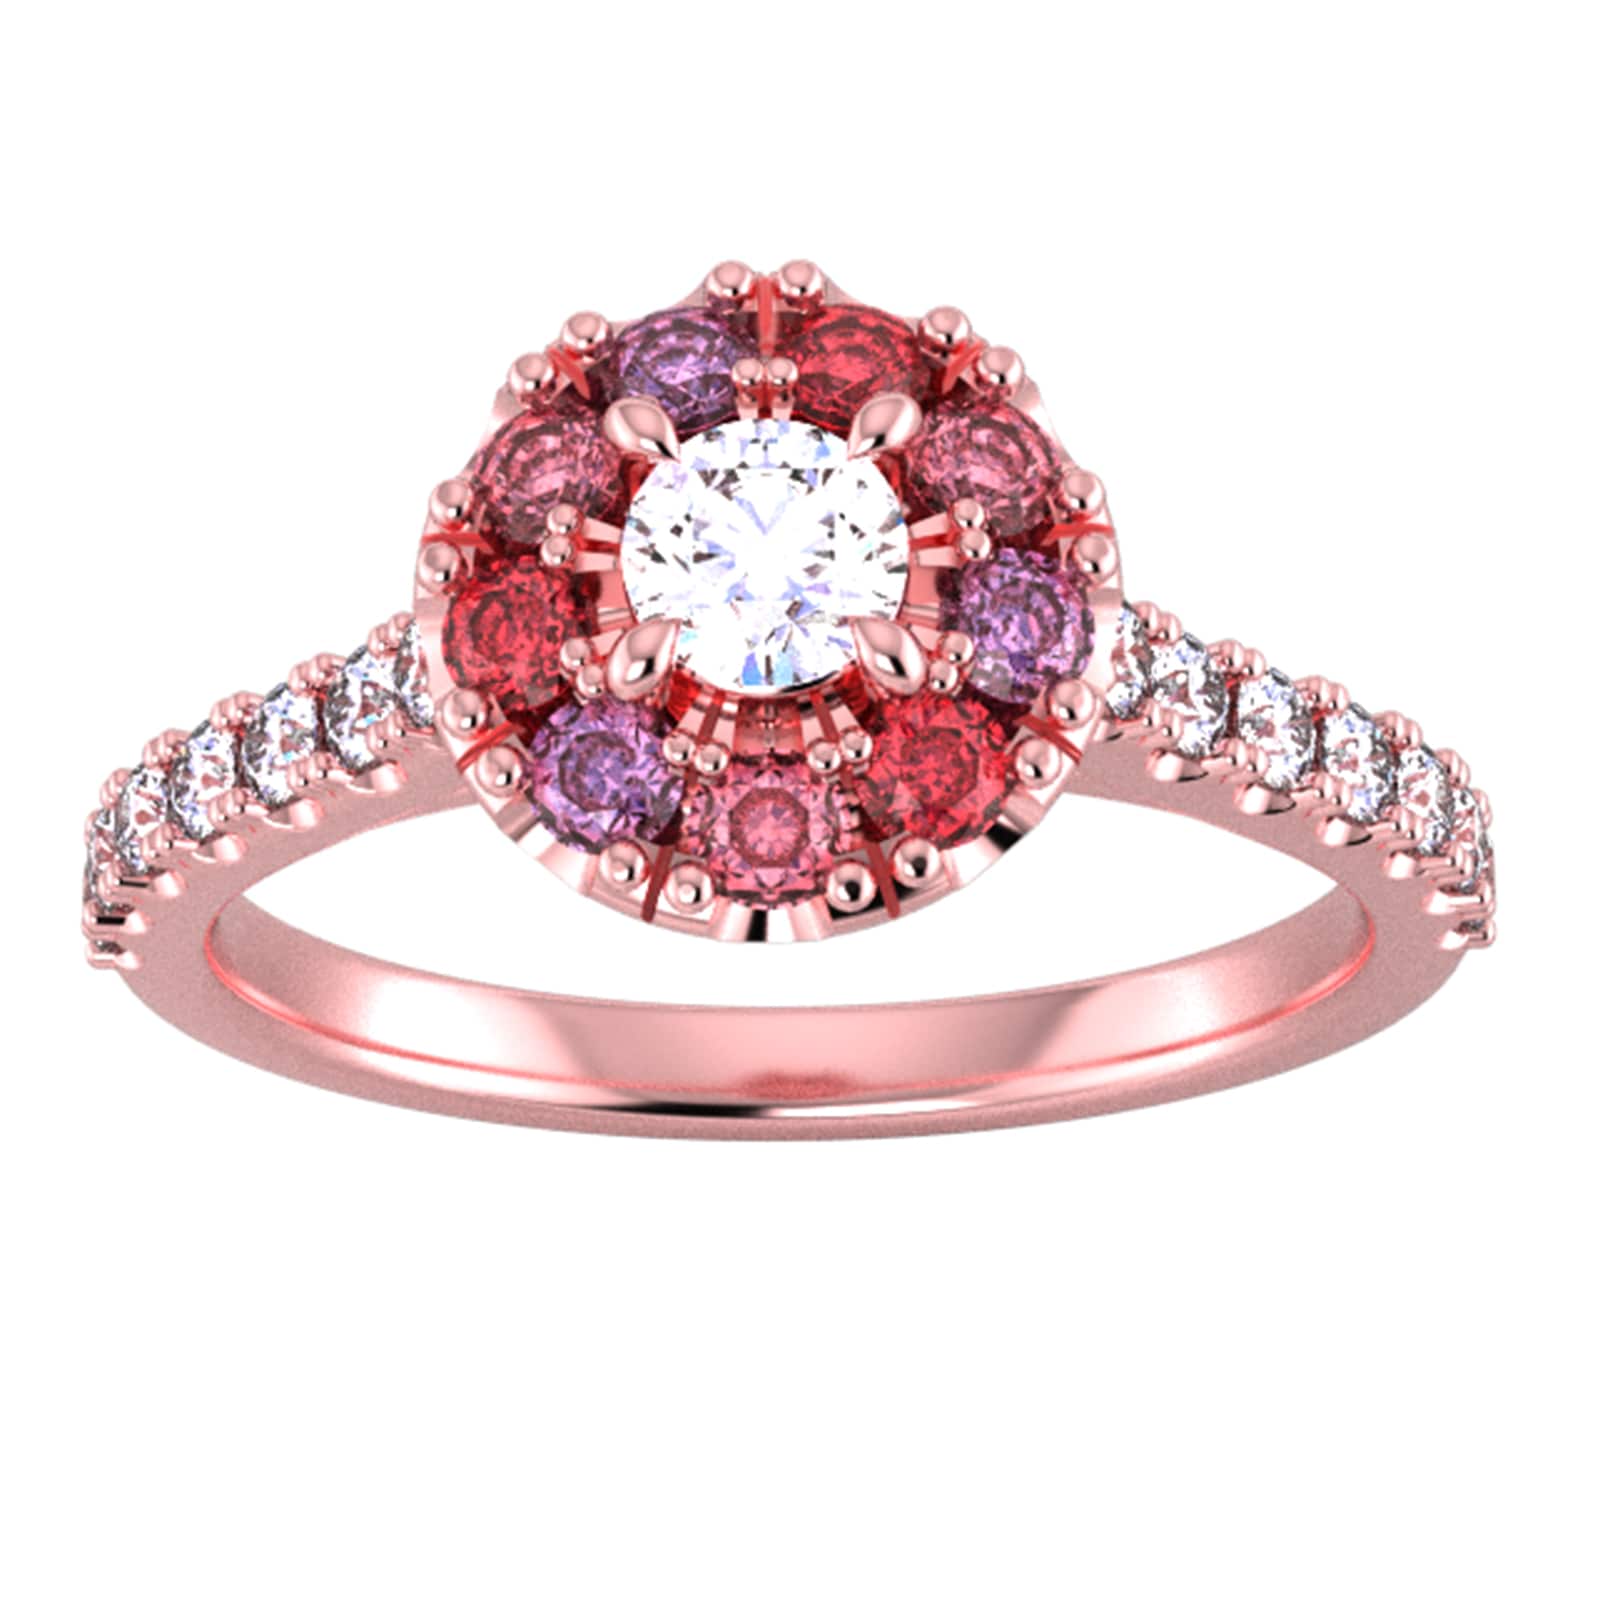 18ct Rose Gold Diamond & Red, Pink, Purple Sapphire Halo Ring - Ring Size Z